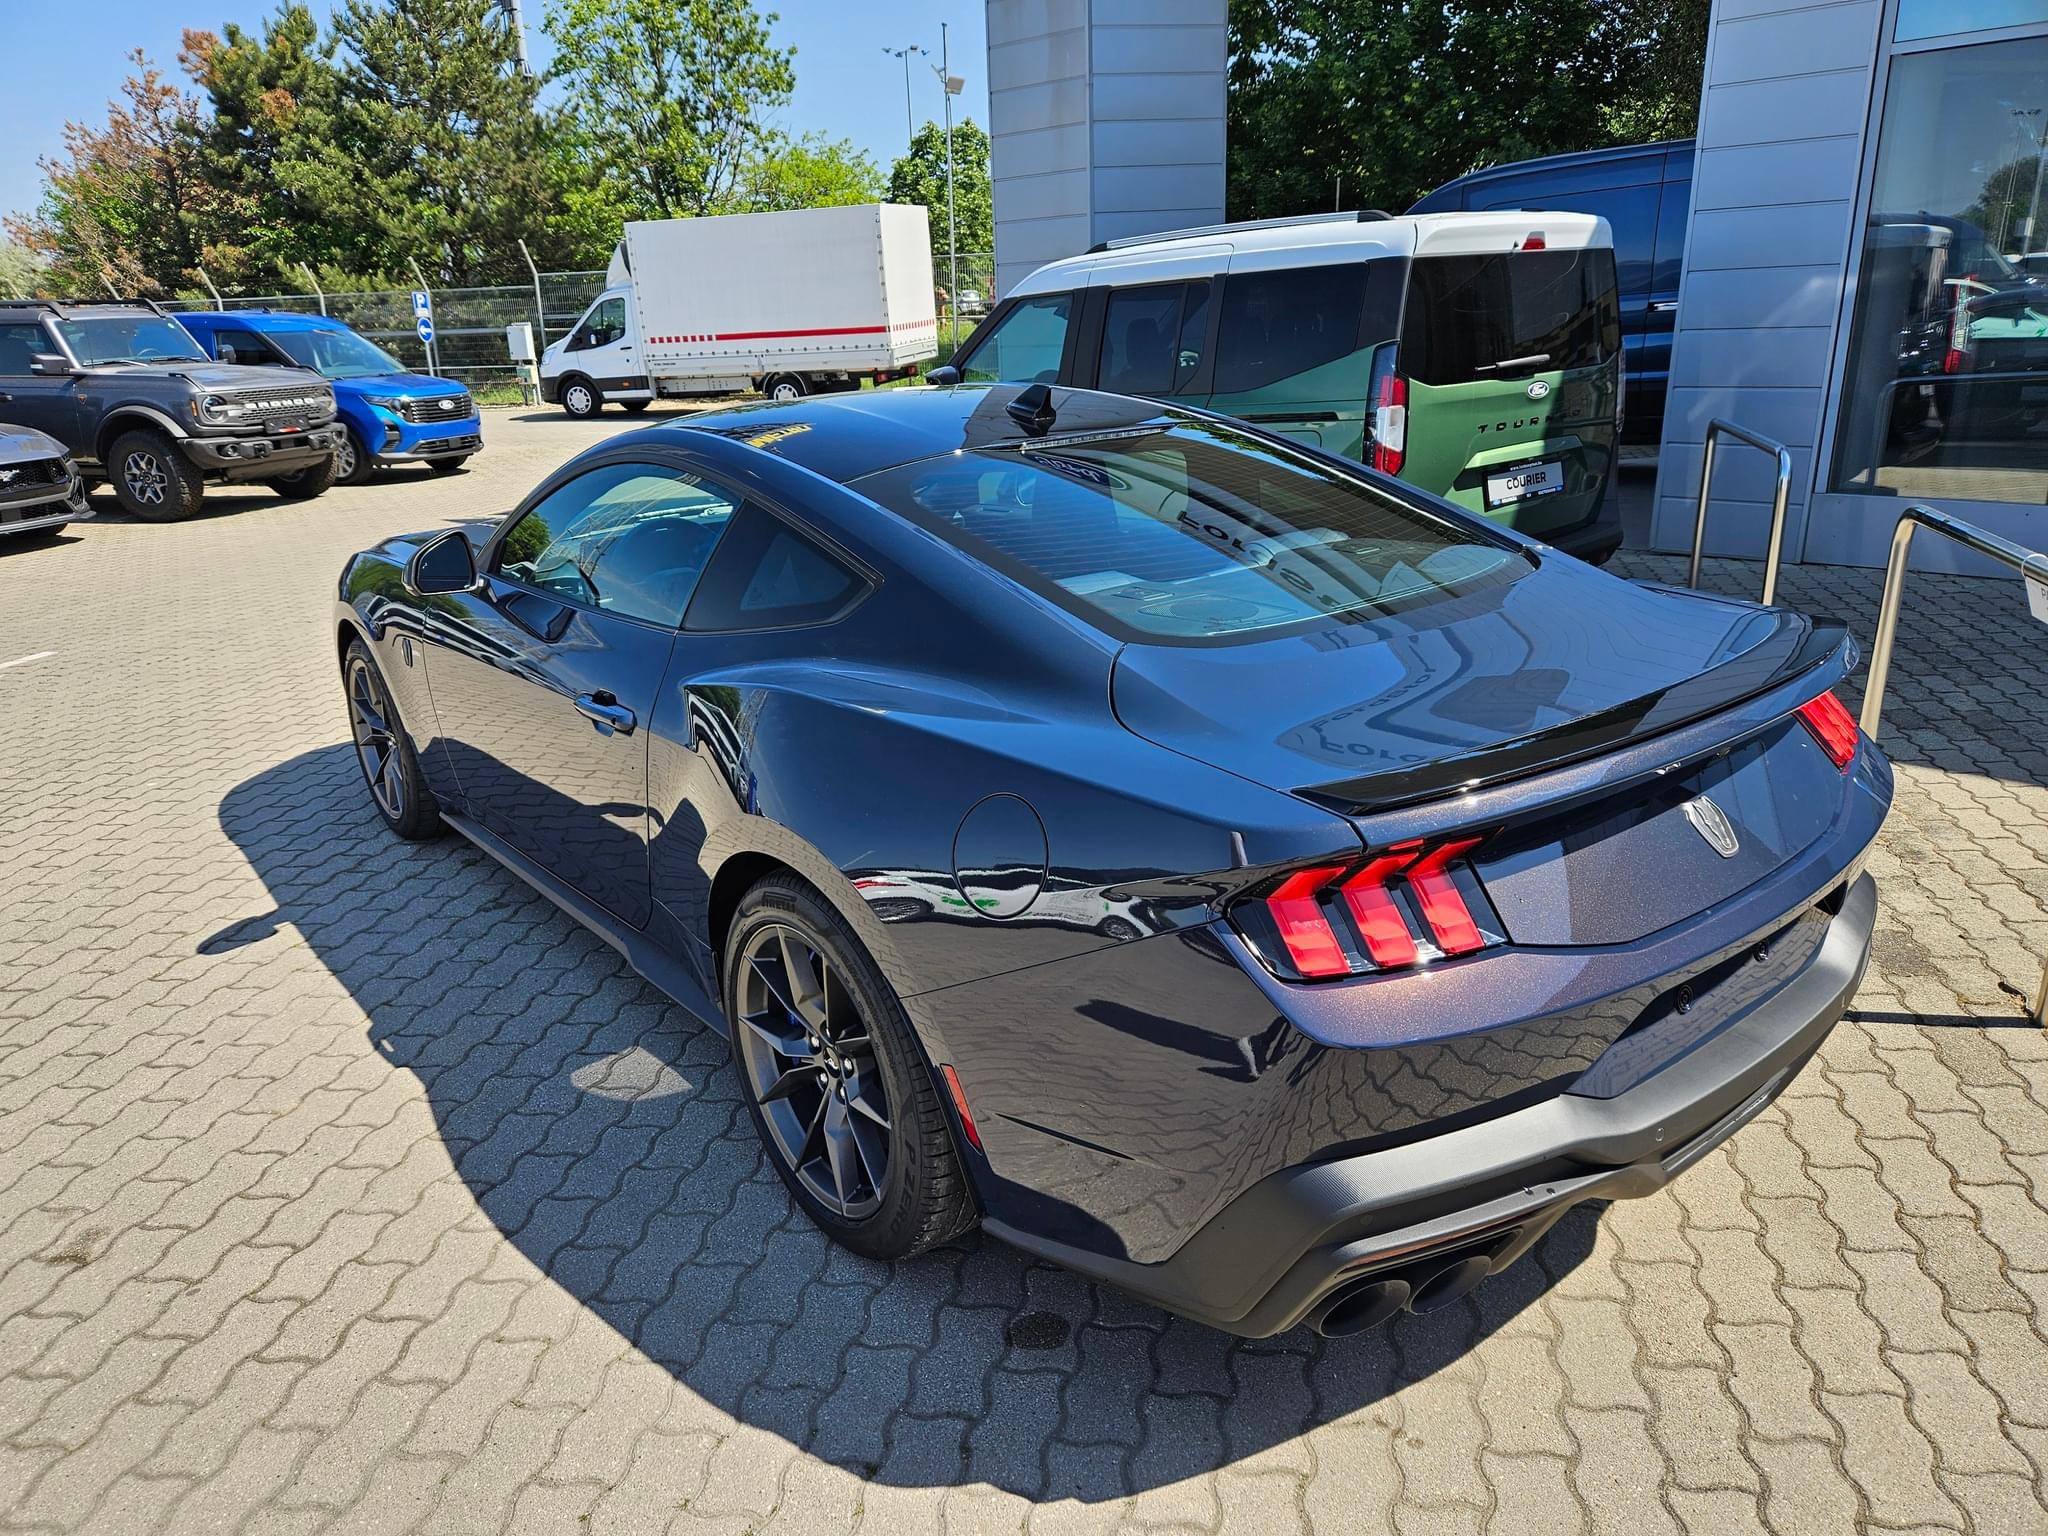 S650 Mustang Spoiler for DH in Europe IMG_5185